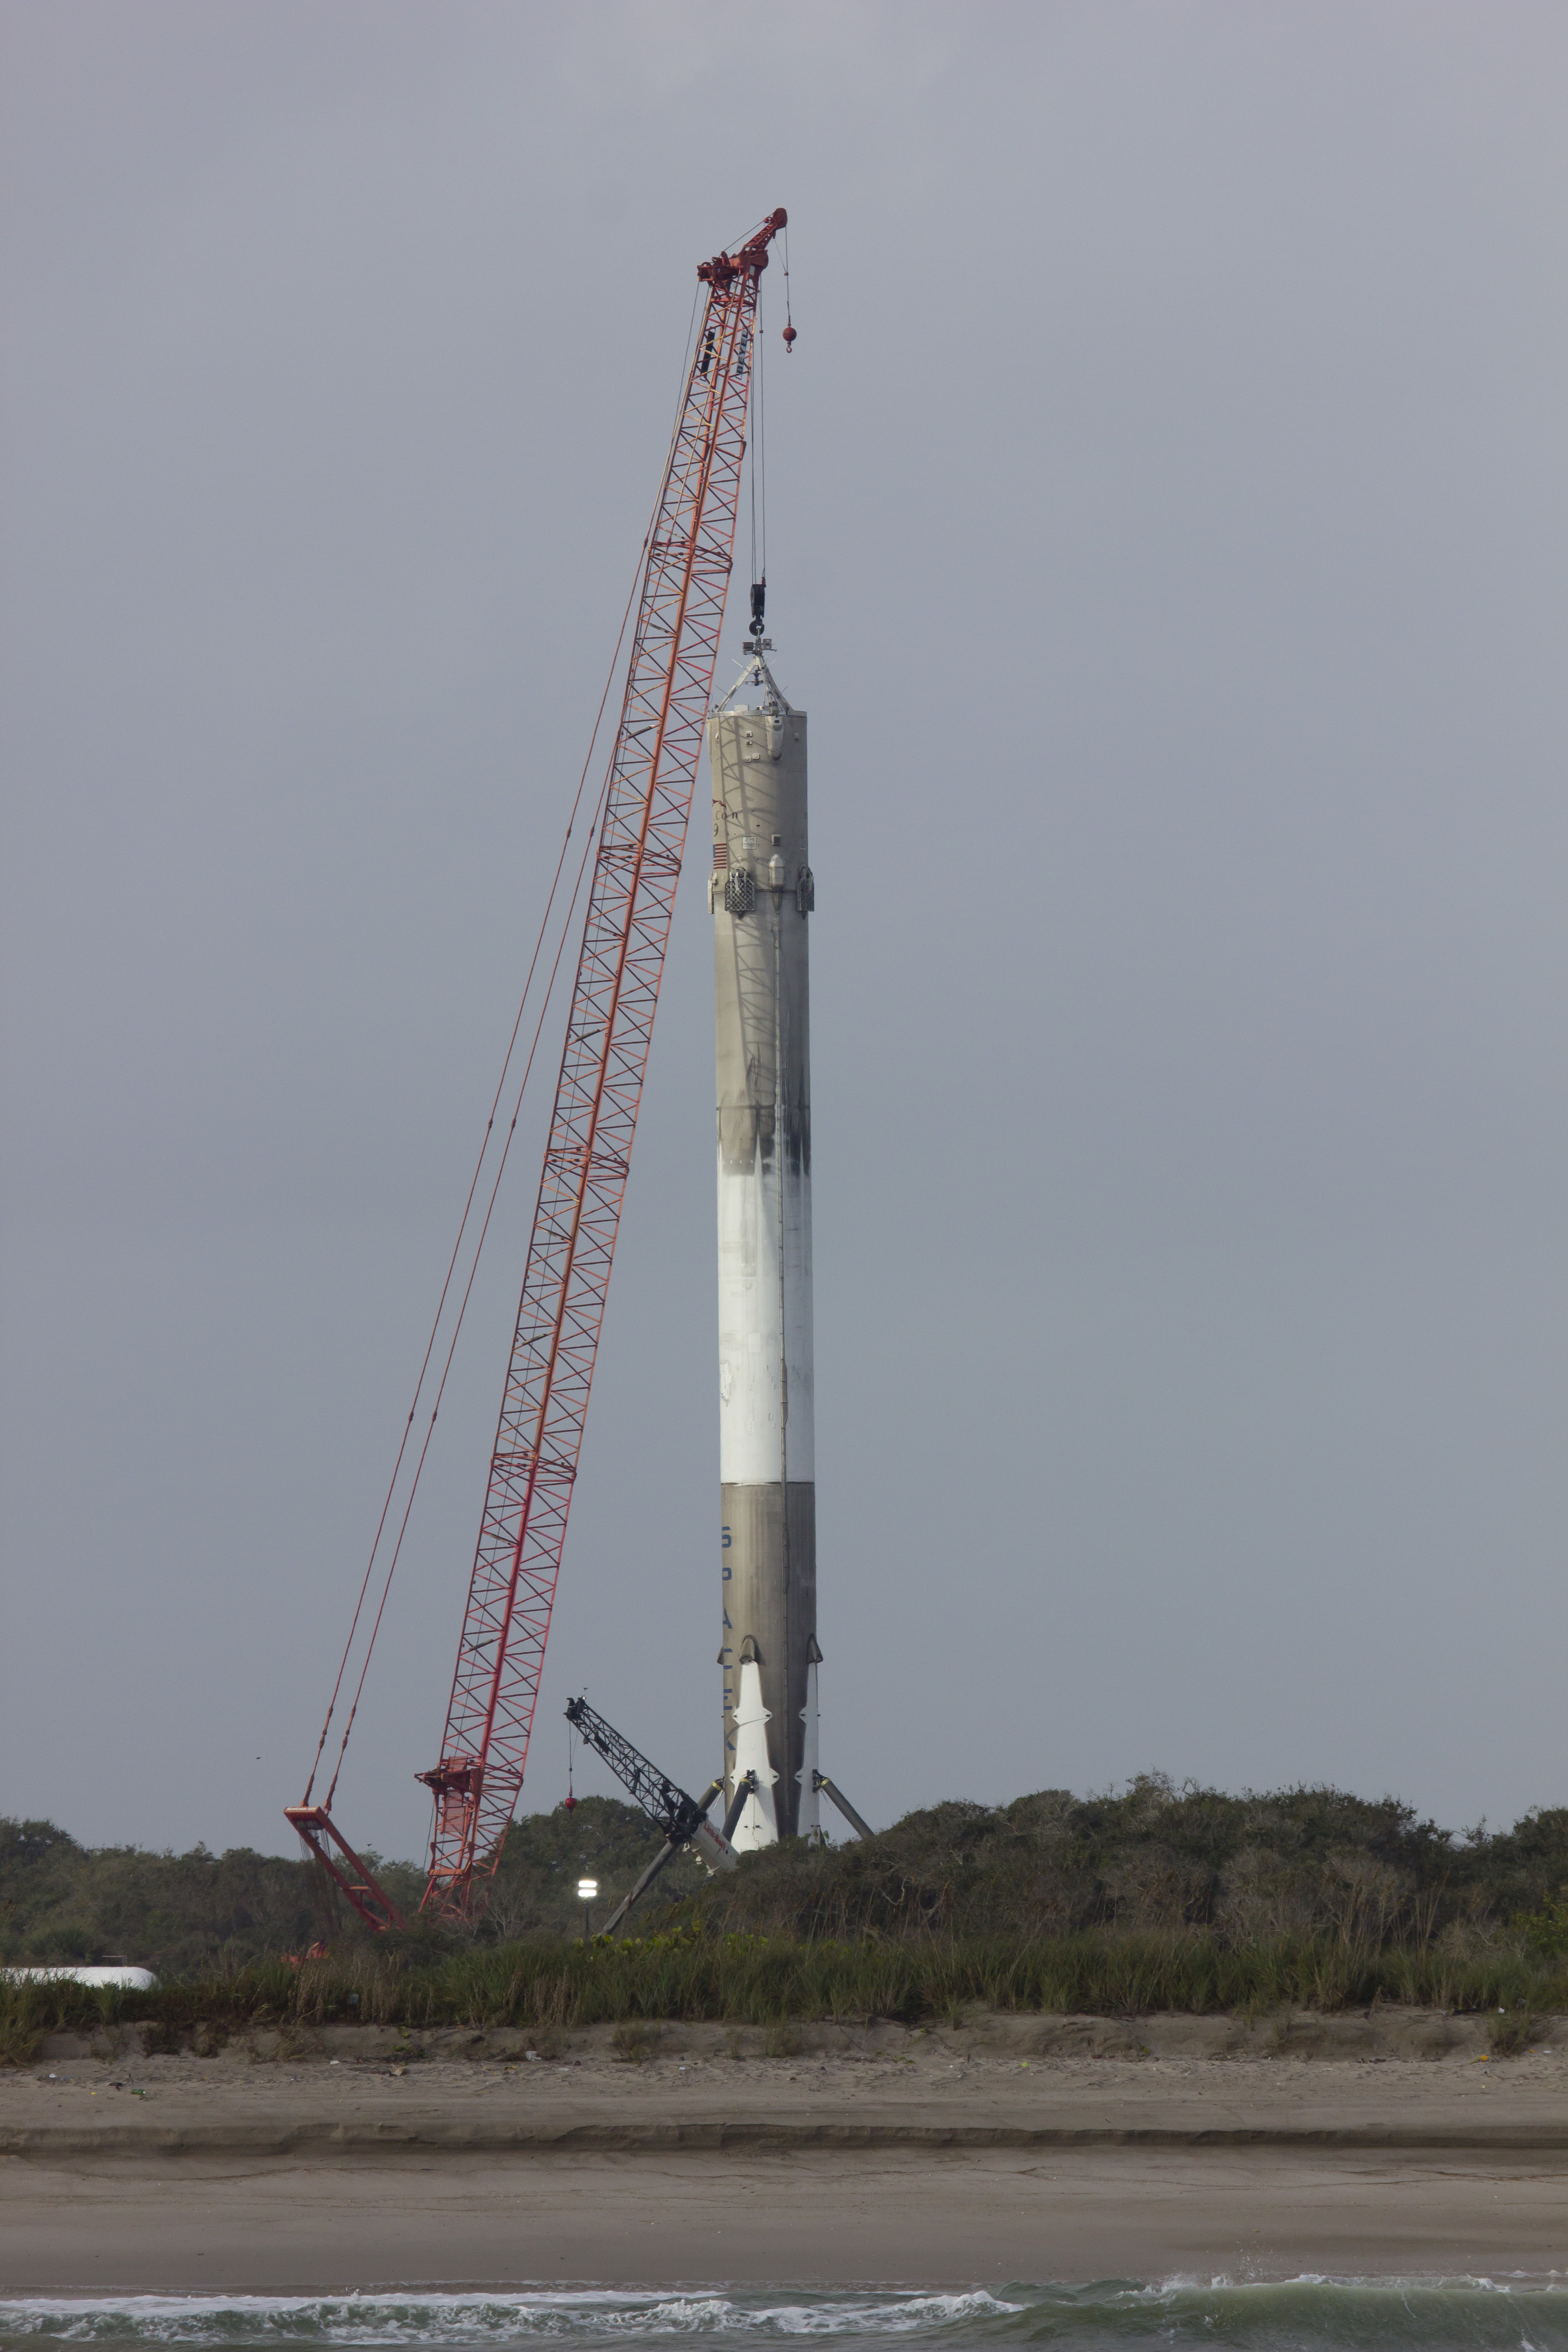 Up close post landing ocean view of SpaceX Falcon 9 at Landing Zone 1 the day after first stage touchdown at Landing Zone 1 on Dec 21, 2015 at Cape Canaveral, Fla.  Credit: Jeff Seibert/AmericaSpace